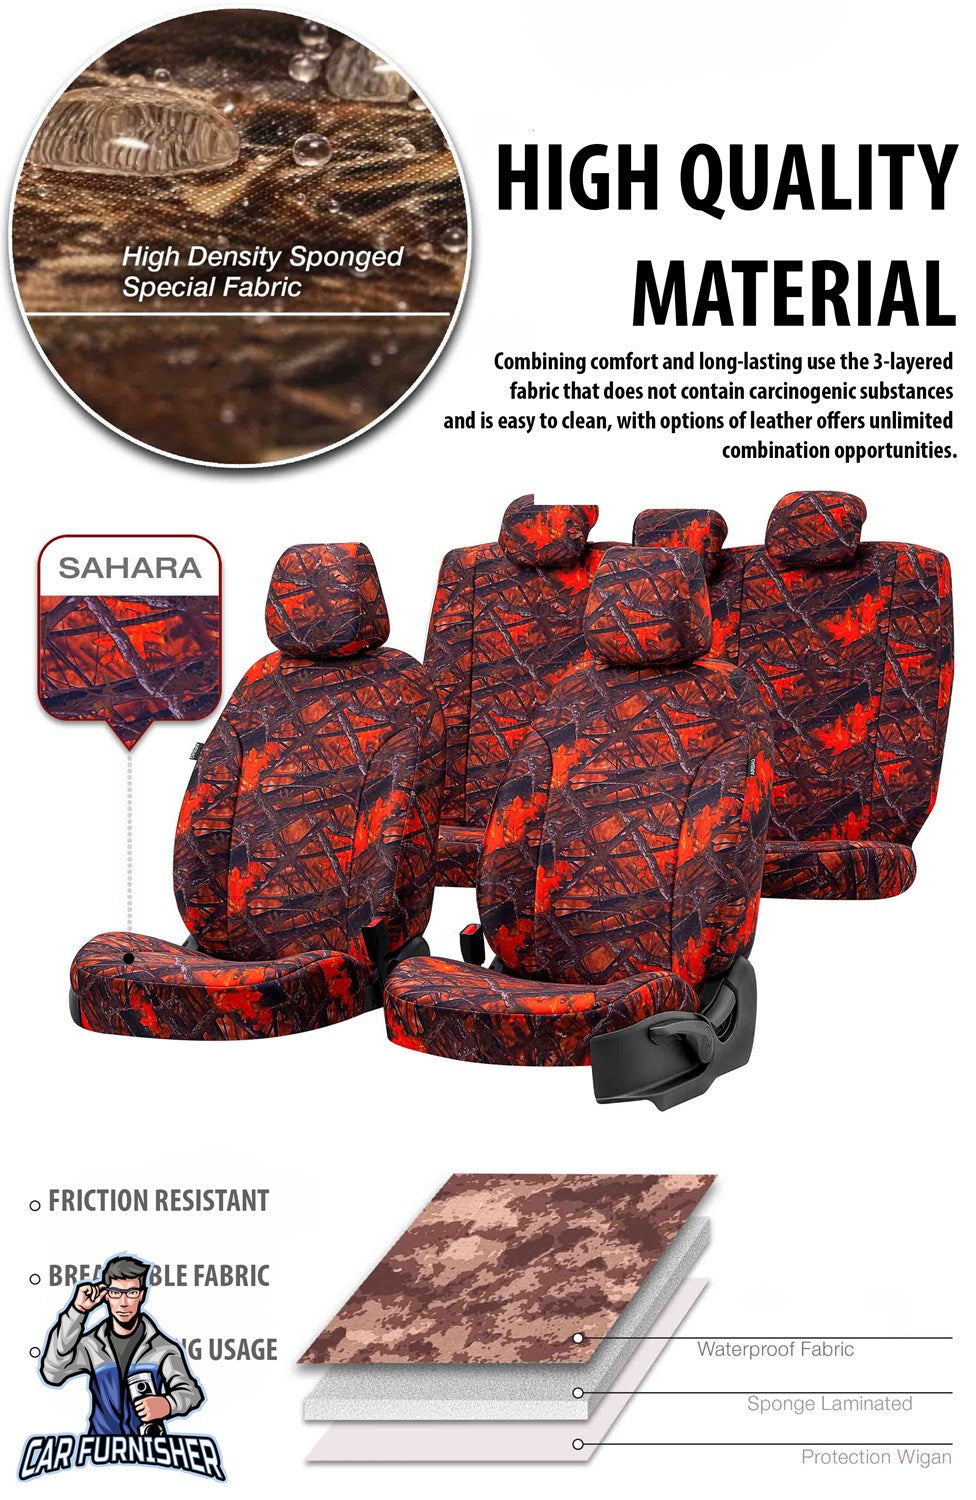 Ssangyong Musso Seat Covers Camouflage Waterproof Design Fuji Camo Waterproof Fabric